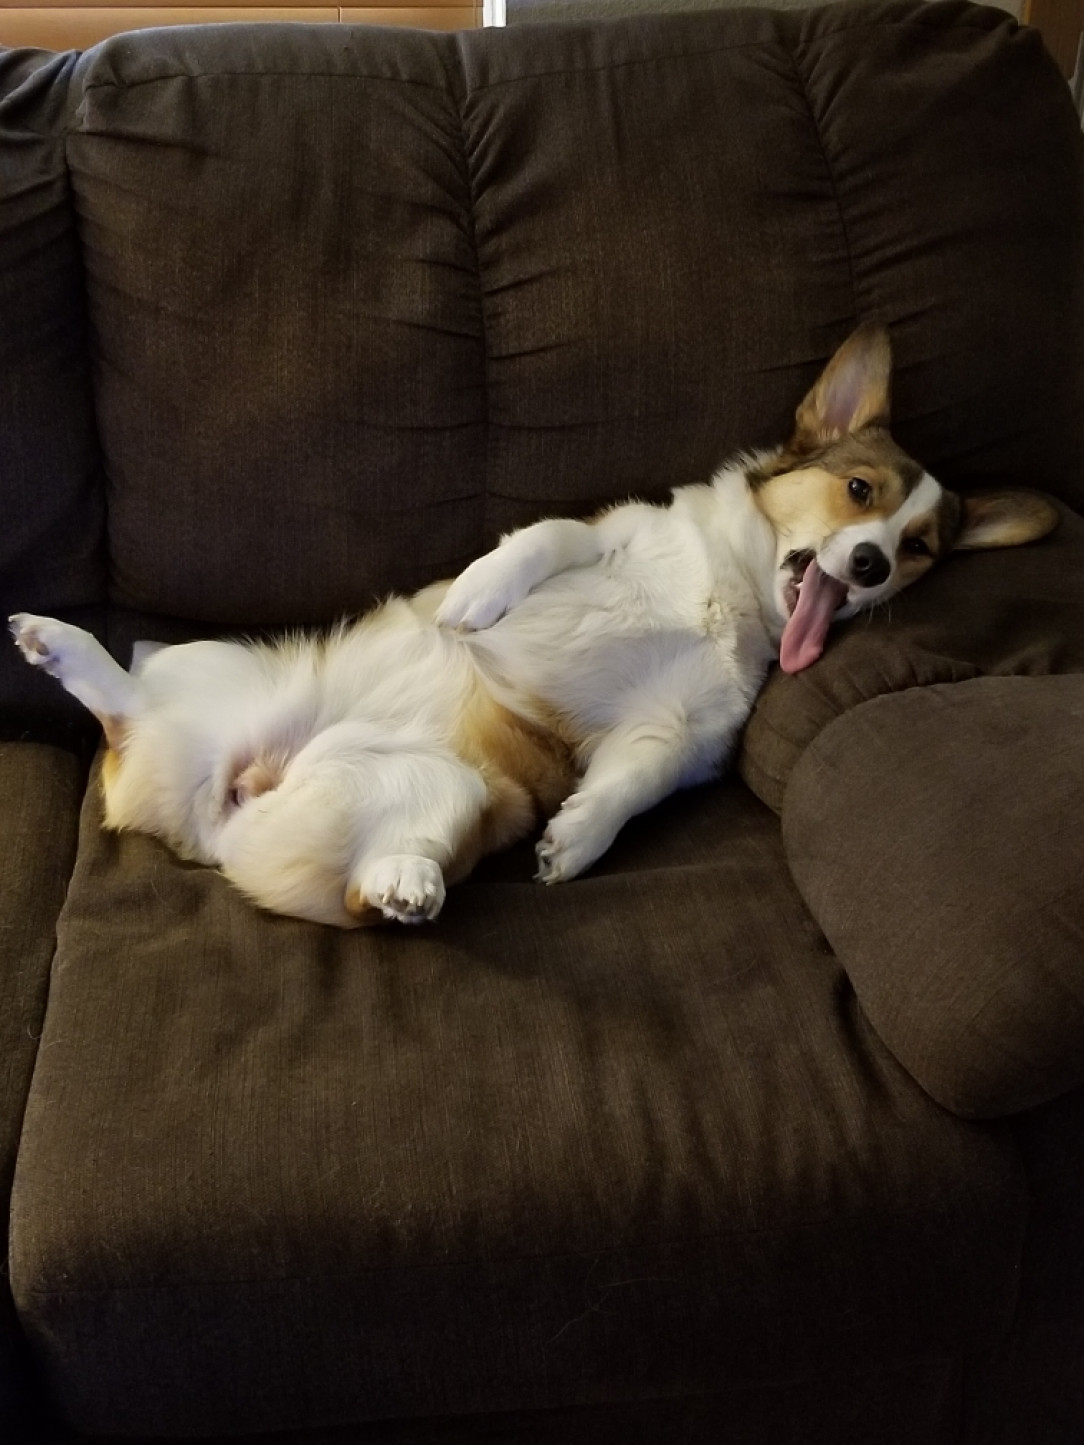 The couch lover